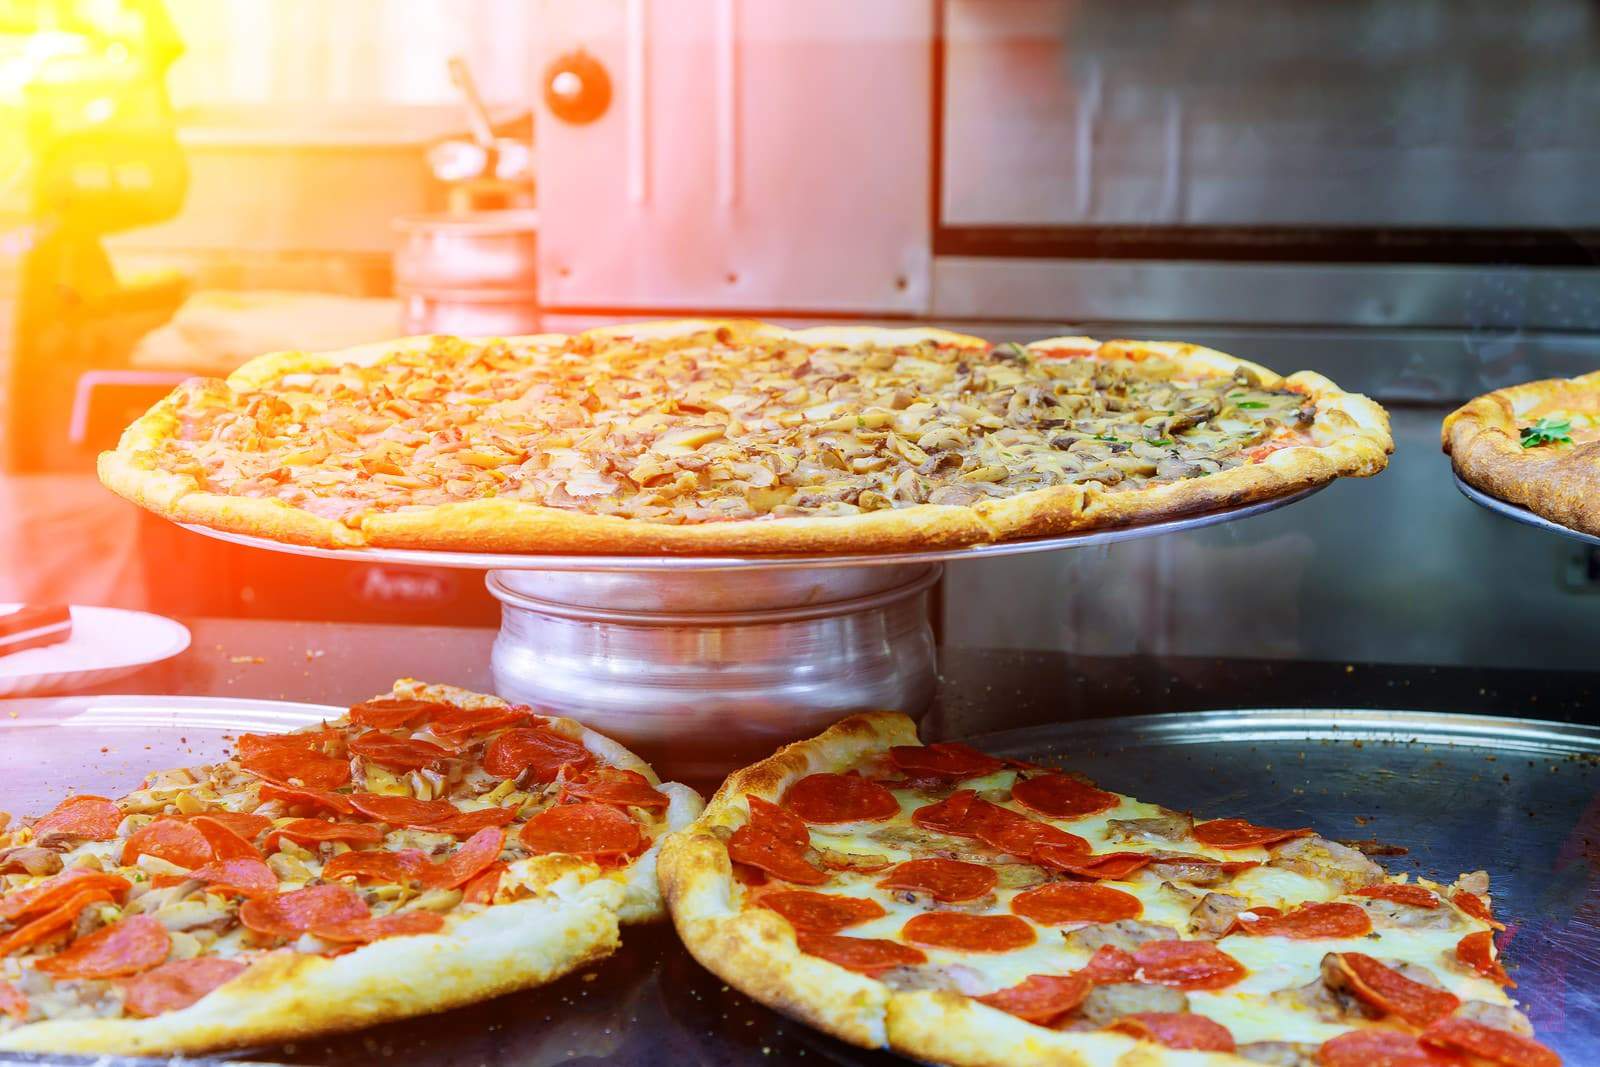 Family of Pizza Shop Owners Sentenced in Tax Fraud Case After Skimming Cash from Business